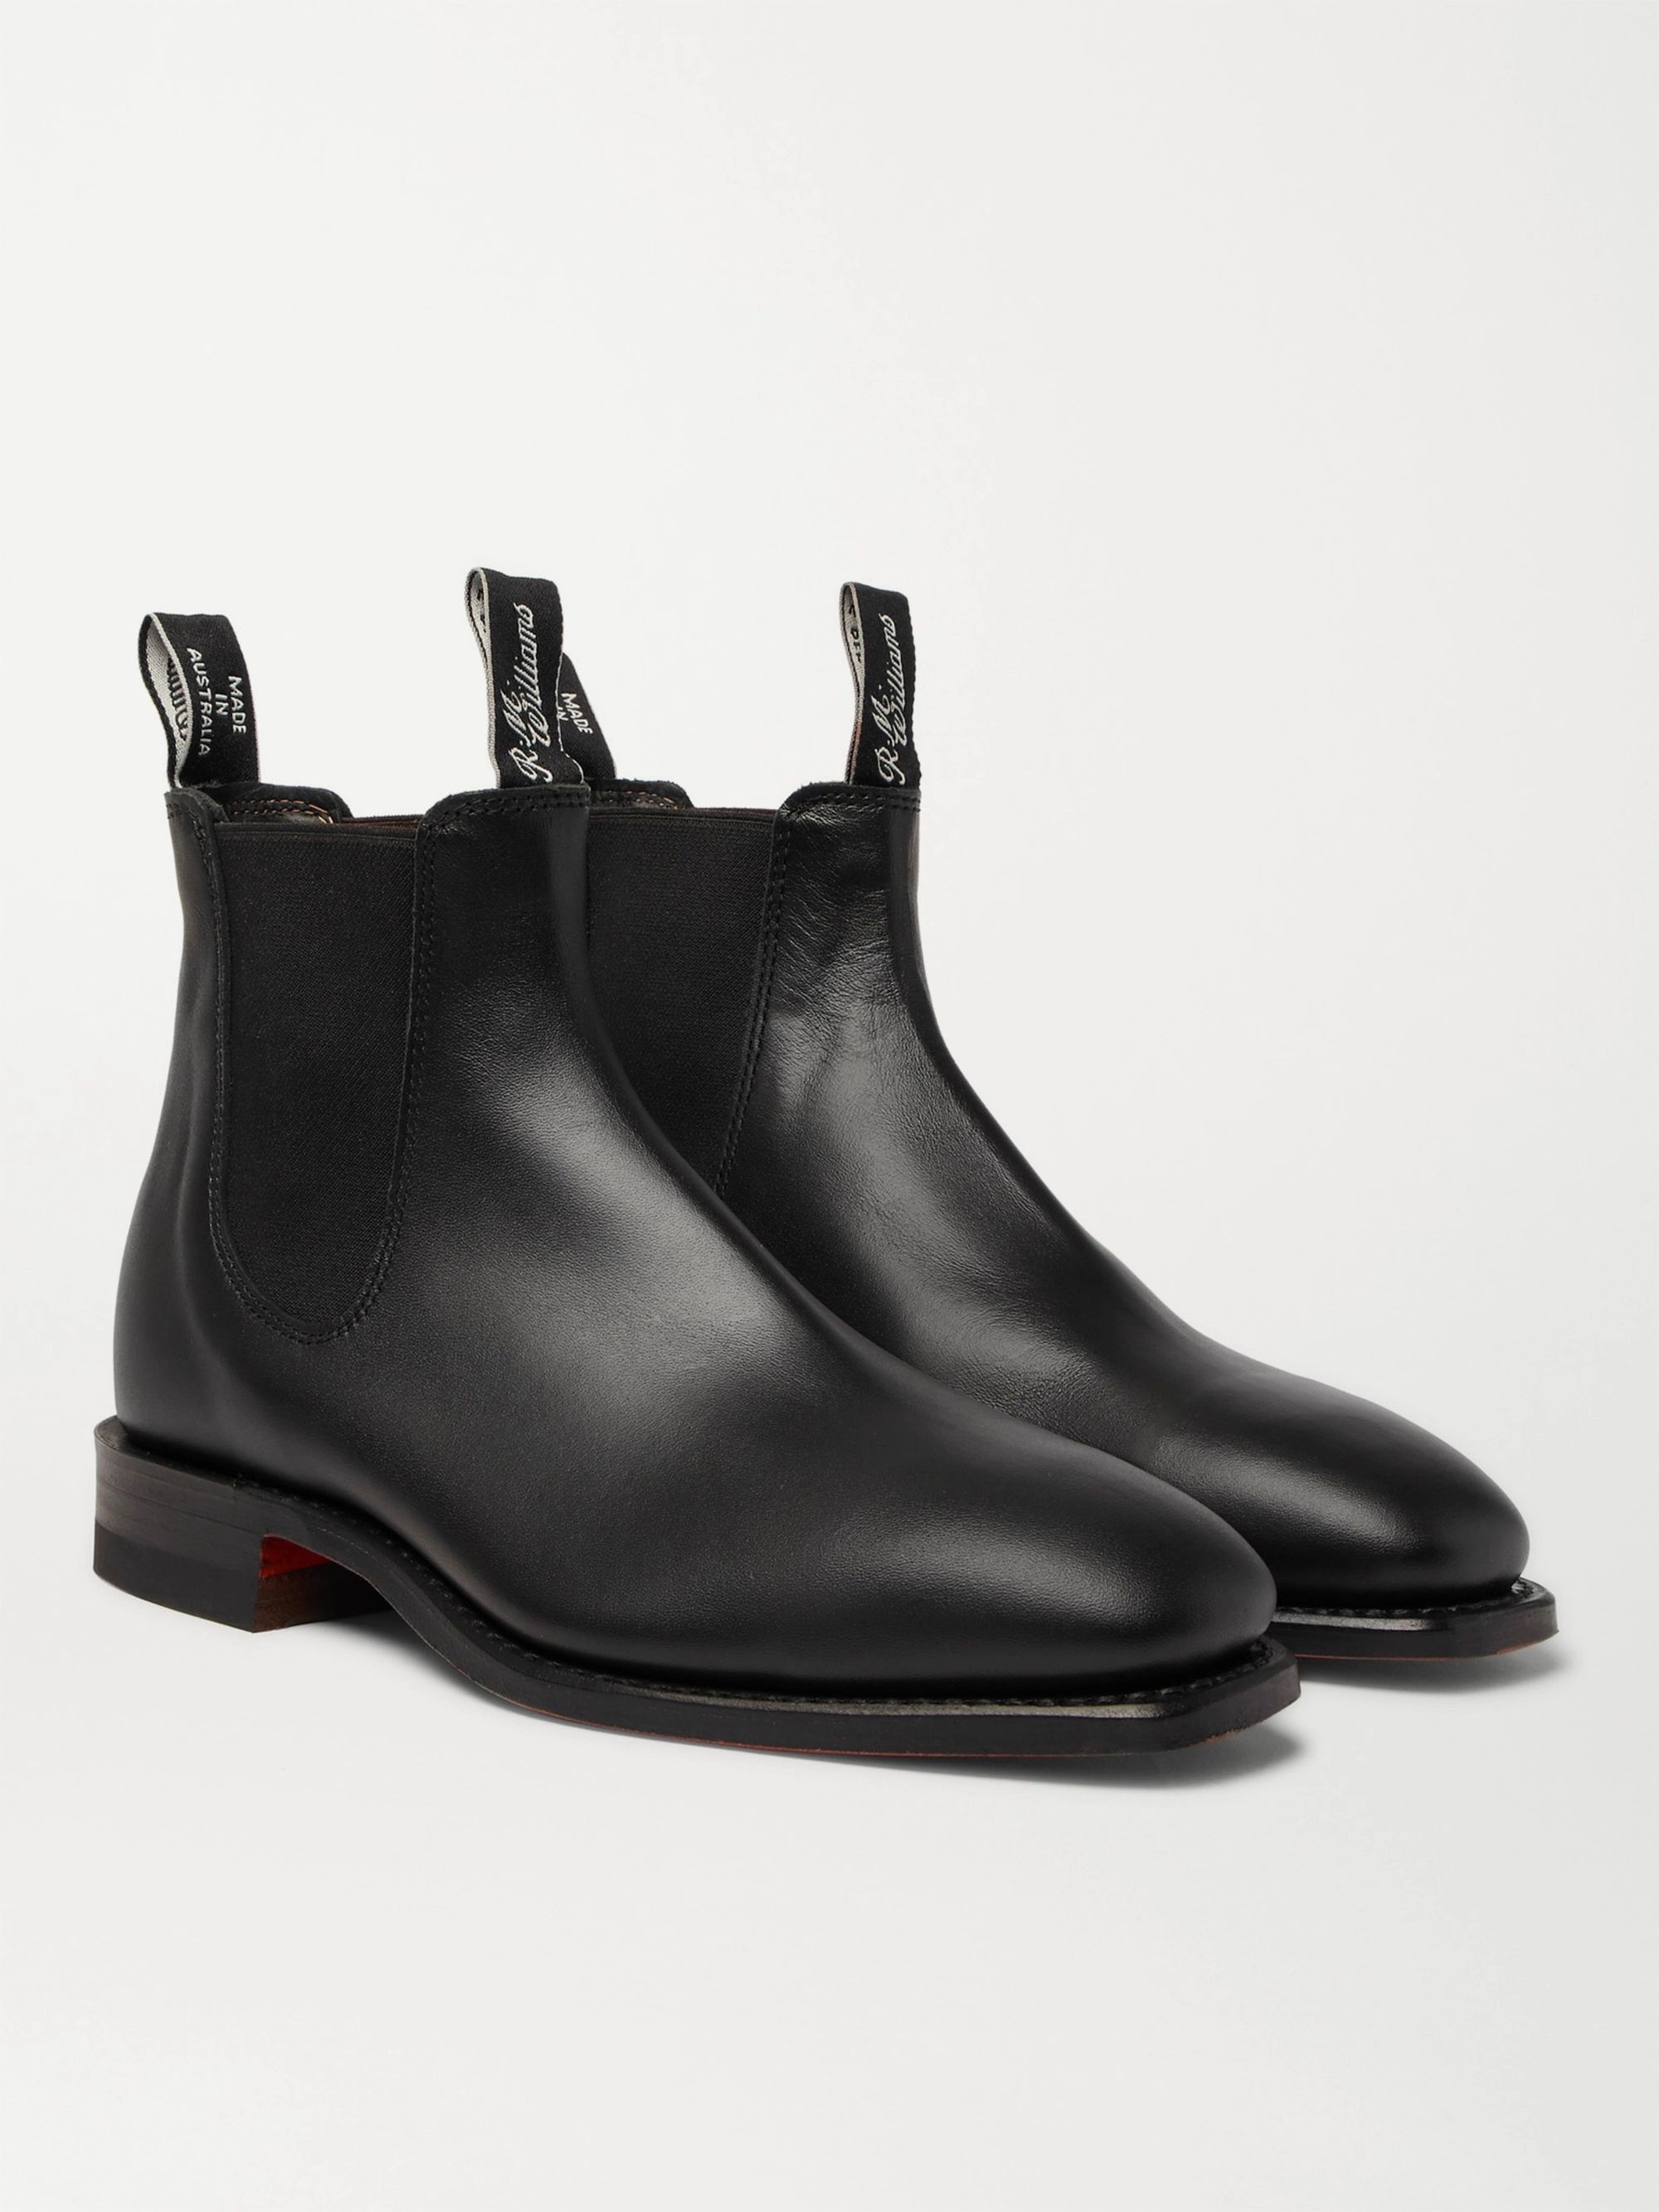 rm williams black chelsea boots